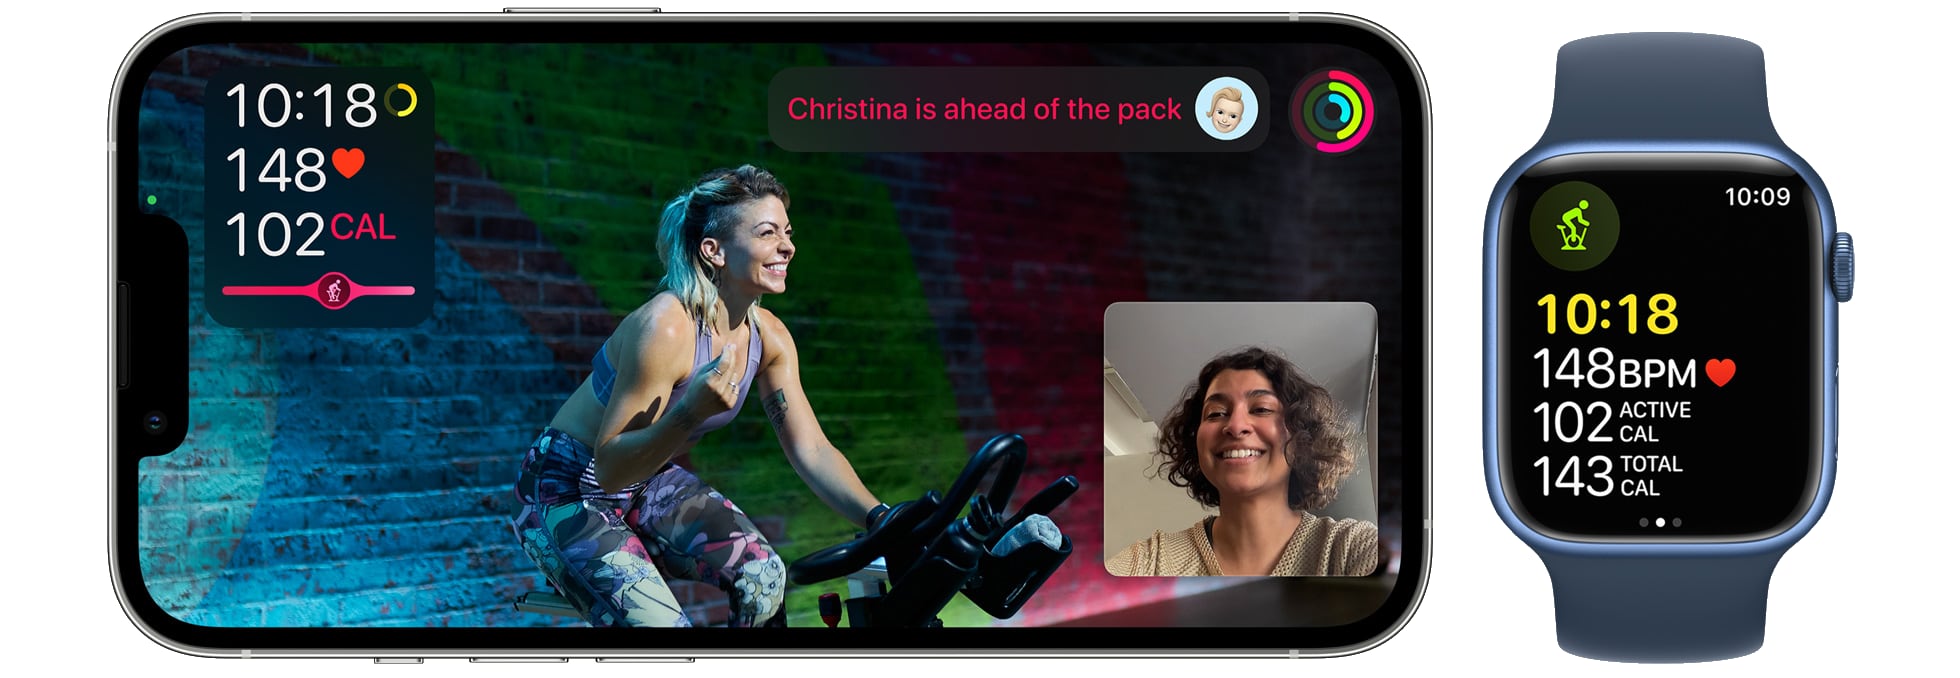 Apple's marketing image showing Fitness+ on iPhone and Apple Watch with the SharePlay feature